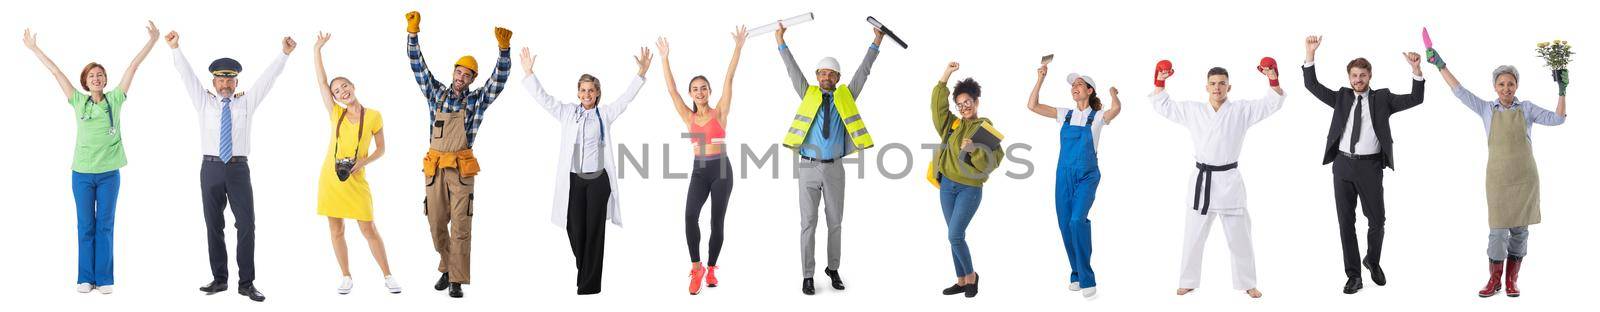 Set collage of professional workers isolated on white background, full length portrait, arms raised, success hr concept